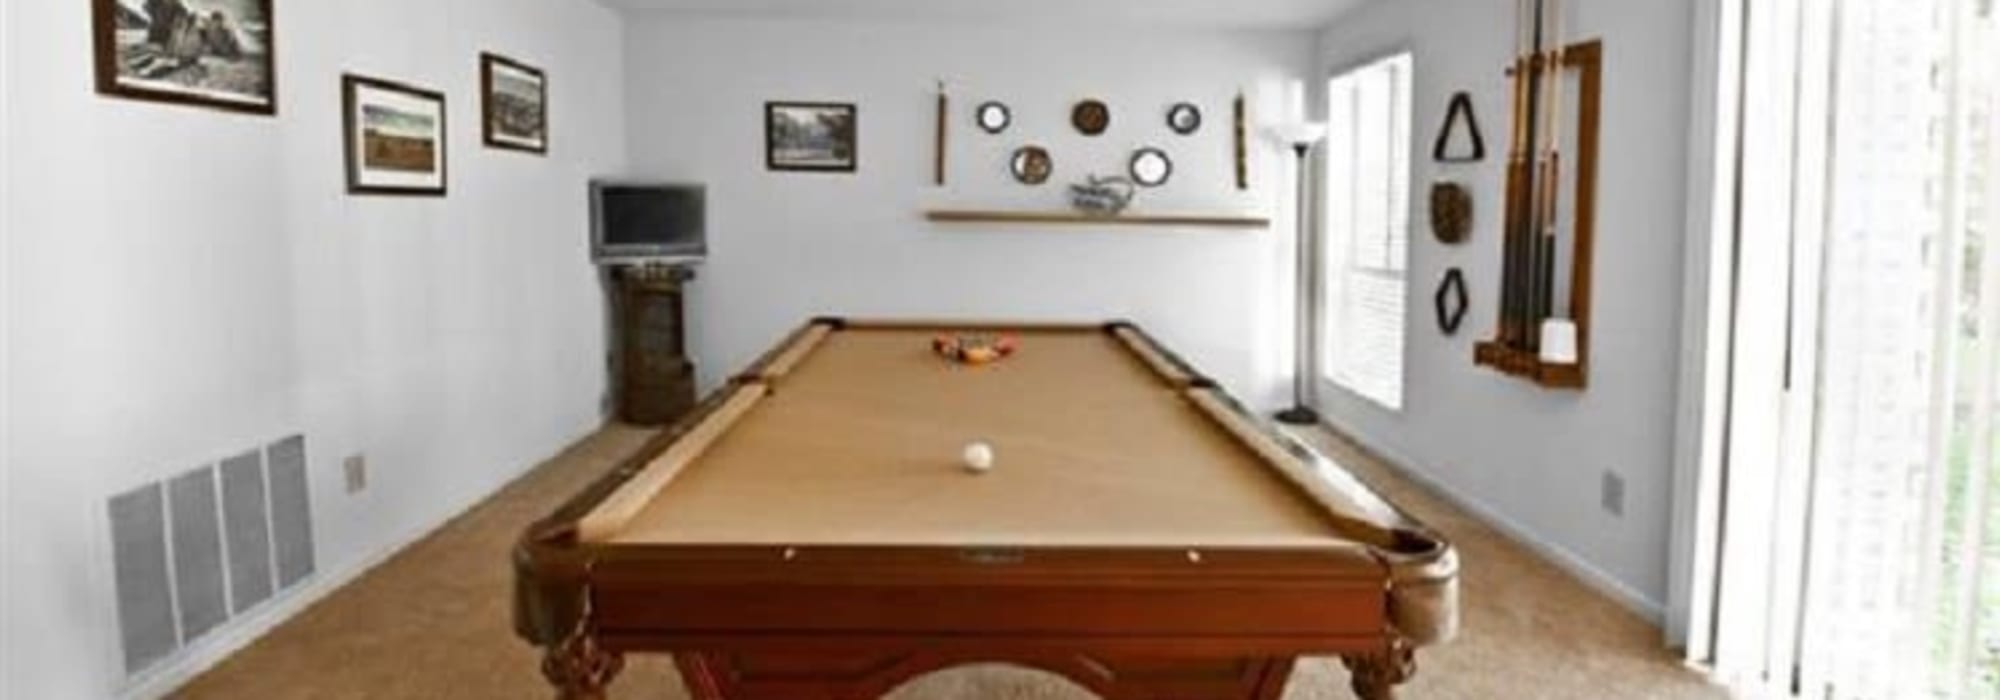 pool table in the clubhouse at Towne Crest in Gaithersburg, Maryland